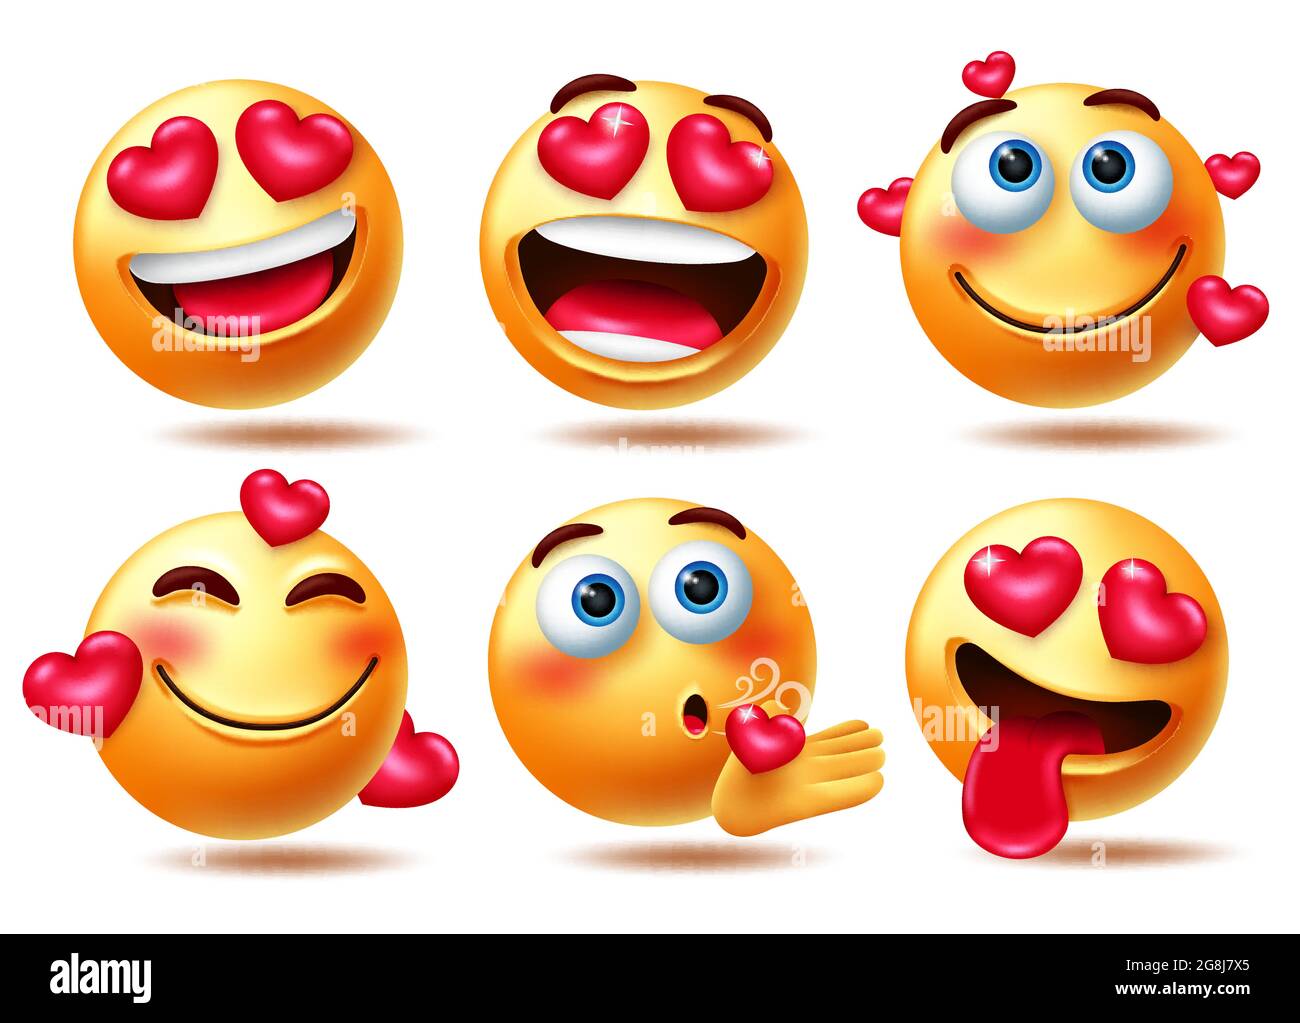 Smileys love emoticon vector character set. Smiley in love 3d emoji characters with hearts element in happy and flying kiss facial expressions. Stock Vector